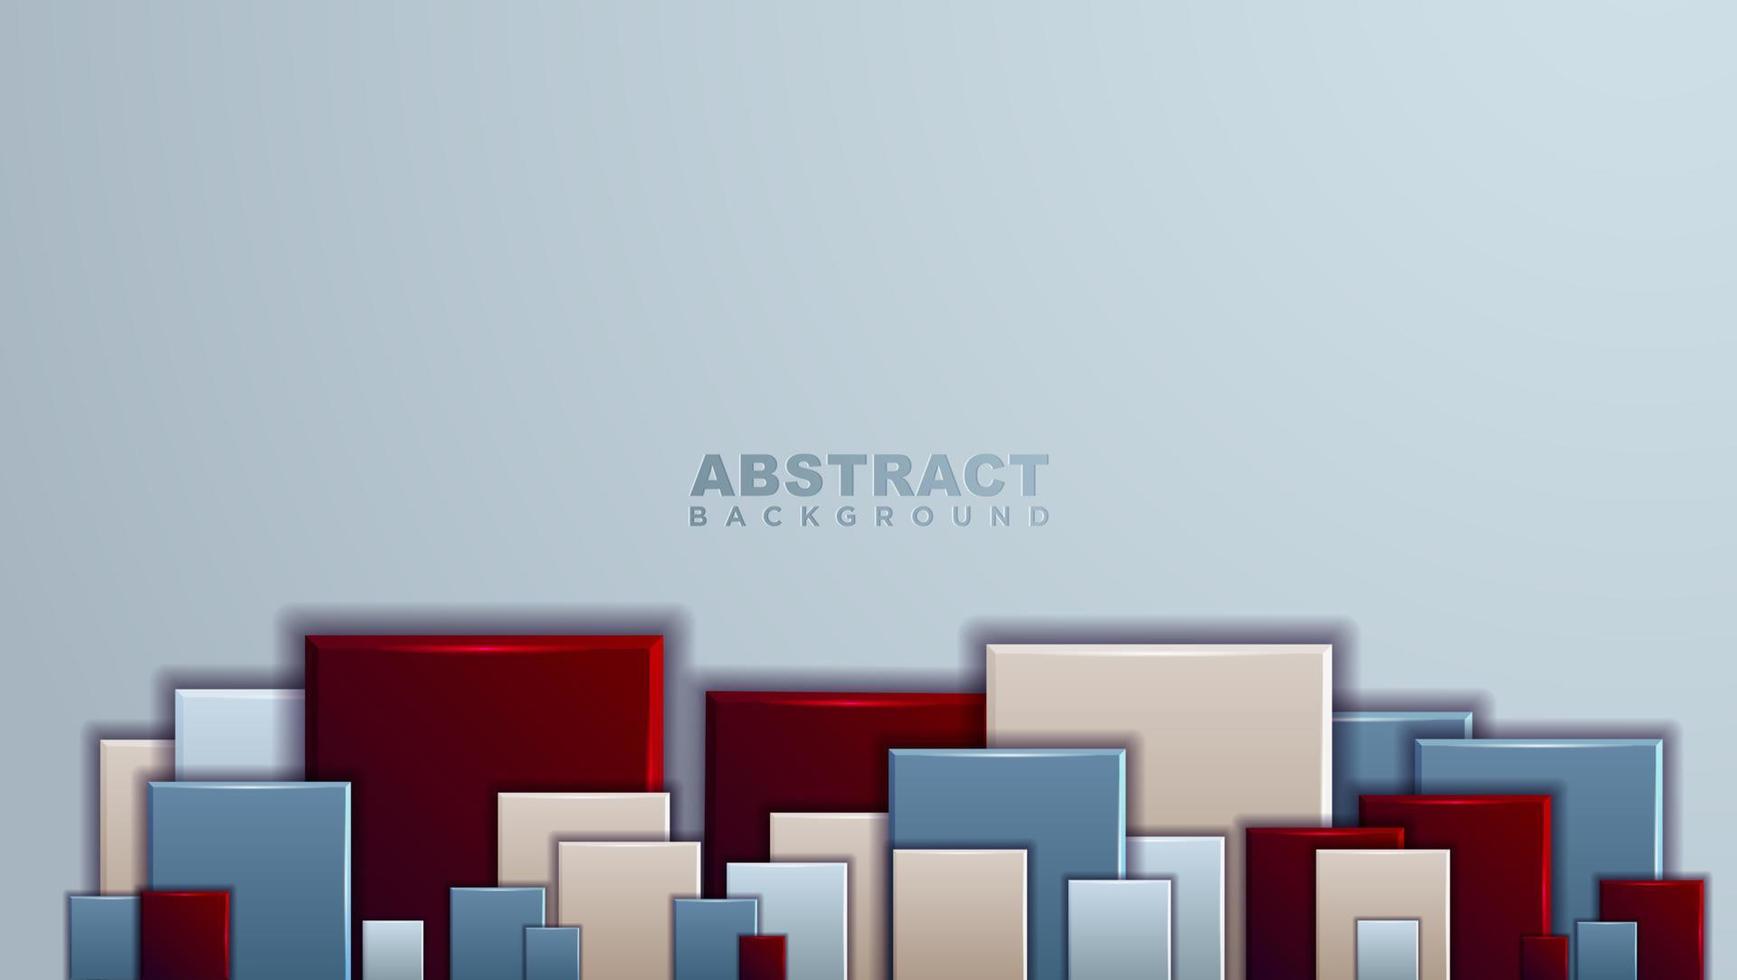 Abstract square background vector. Design for wallpaper, cover design, book design, web background or other vector